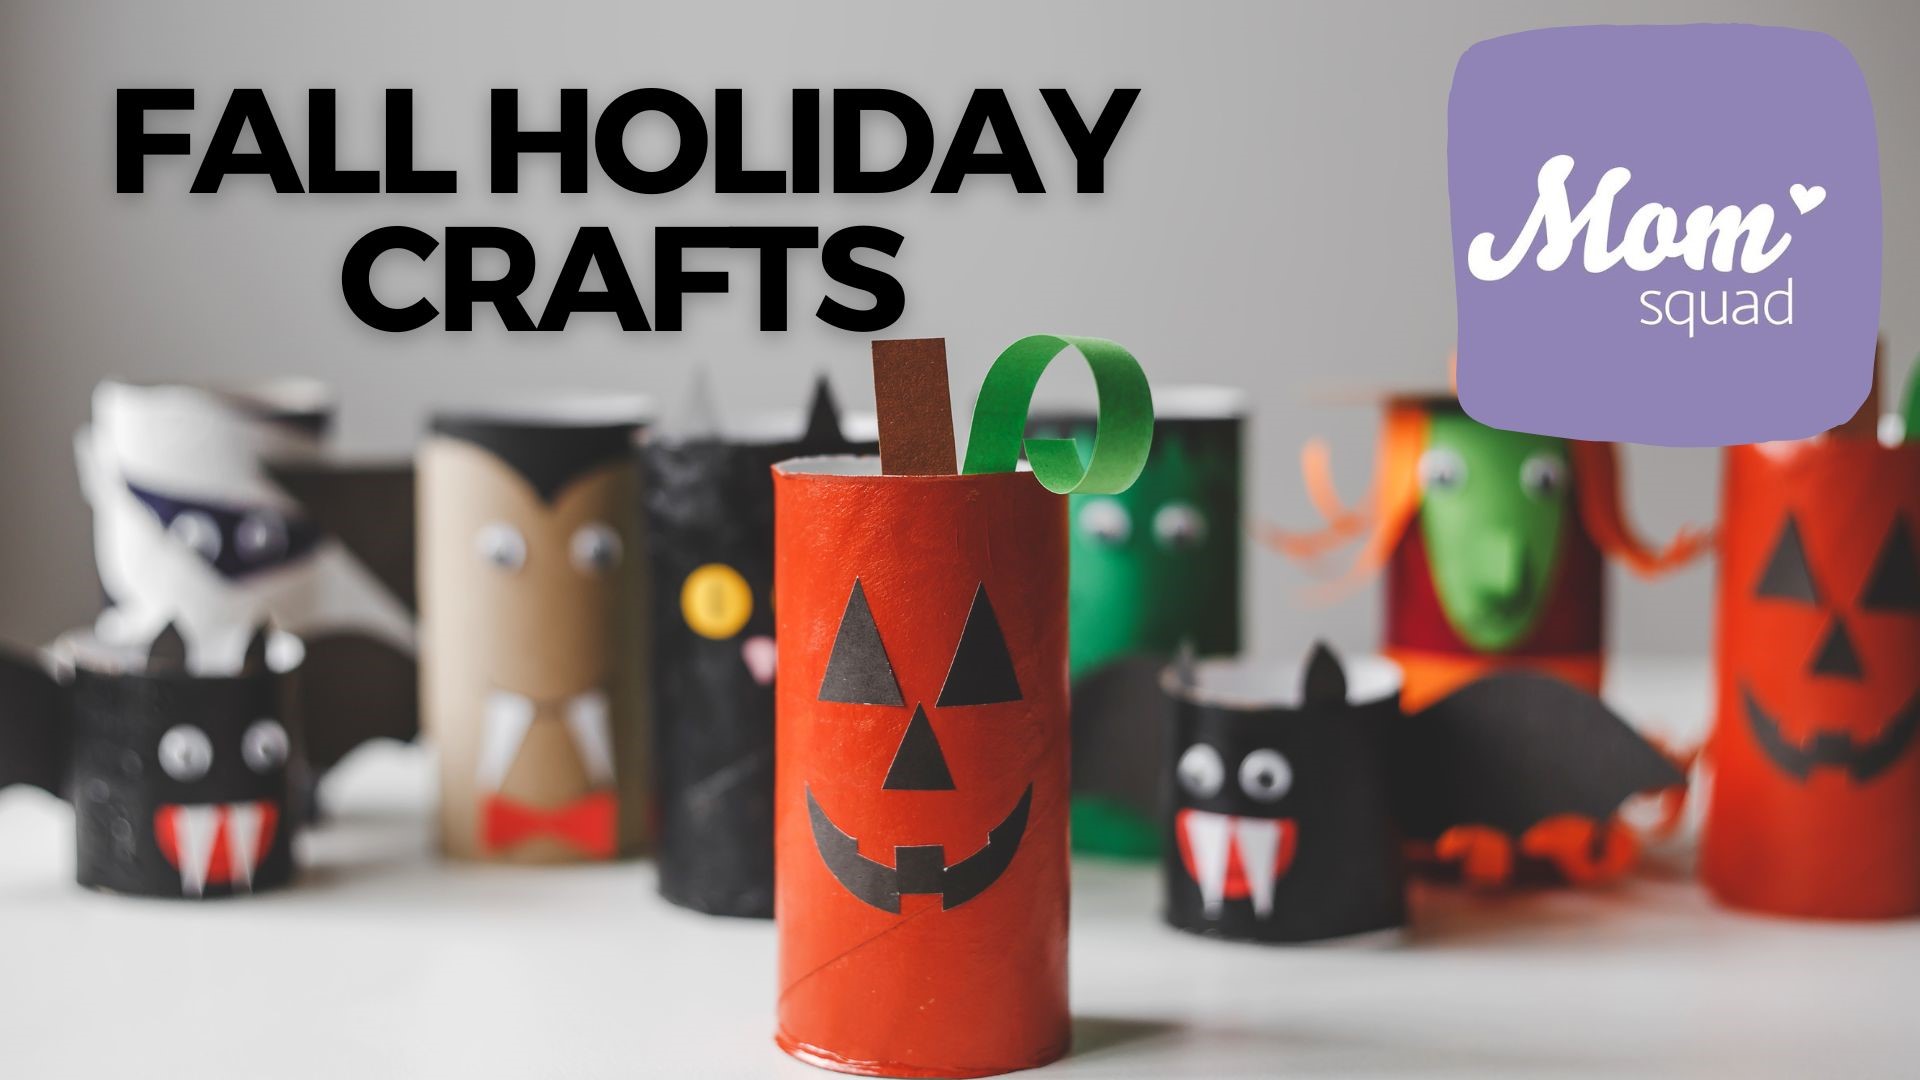 Maureen Kyle shares some Halloween, Thanksgiving and fall craft ideas from JOANN Fabric. From chocolate covered treats to blankets, there is something for all.